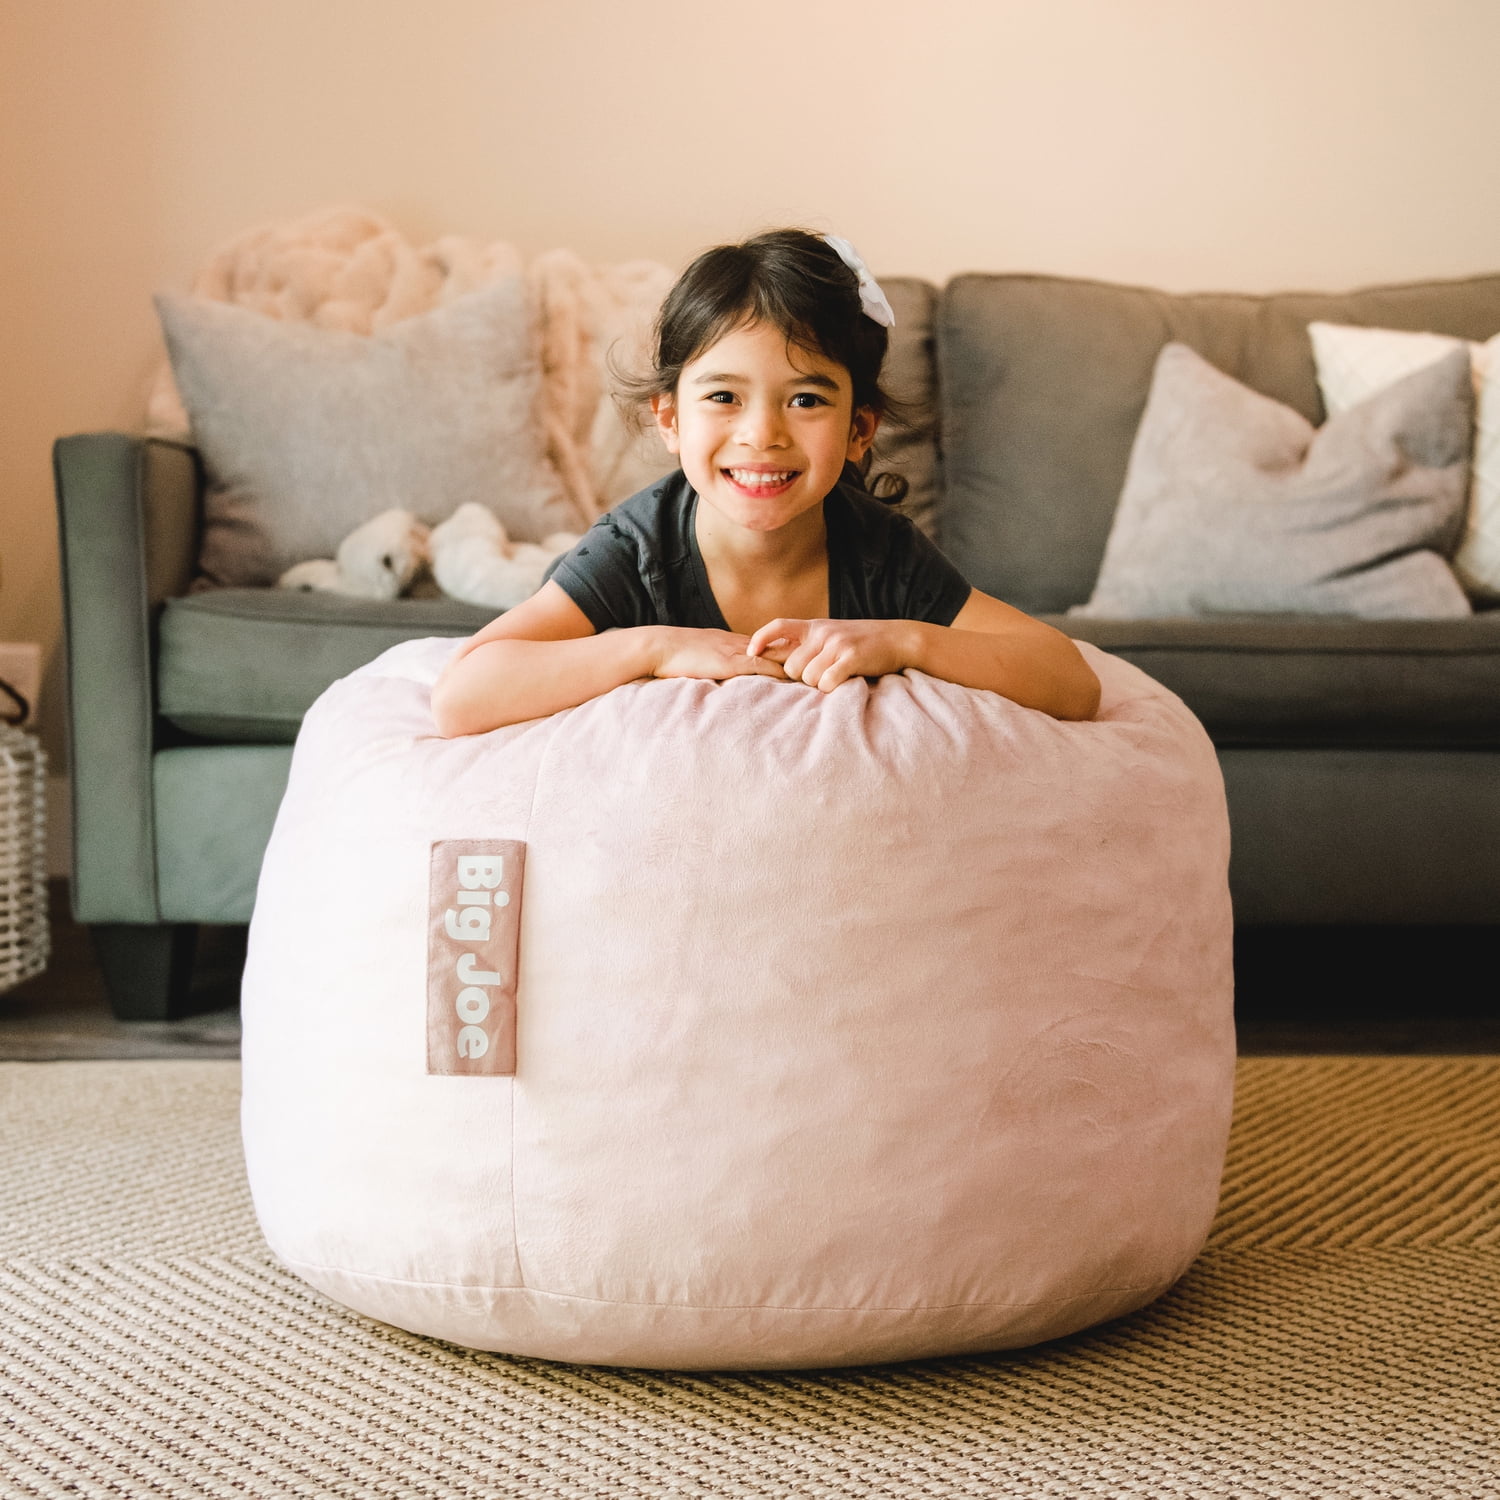 HDMLDP 7FT Bean Bag Chairs for Adults Kids Soft Fluffy Big Joe Bean Bag  Chair Without Filling Round Sofa Reading Chairs for Bedroom Living Room  Decor